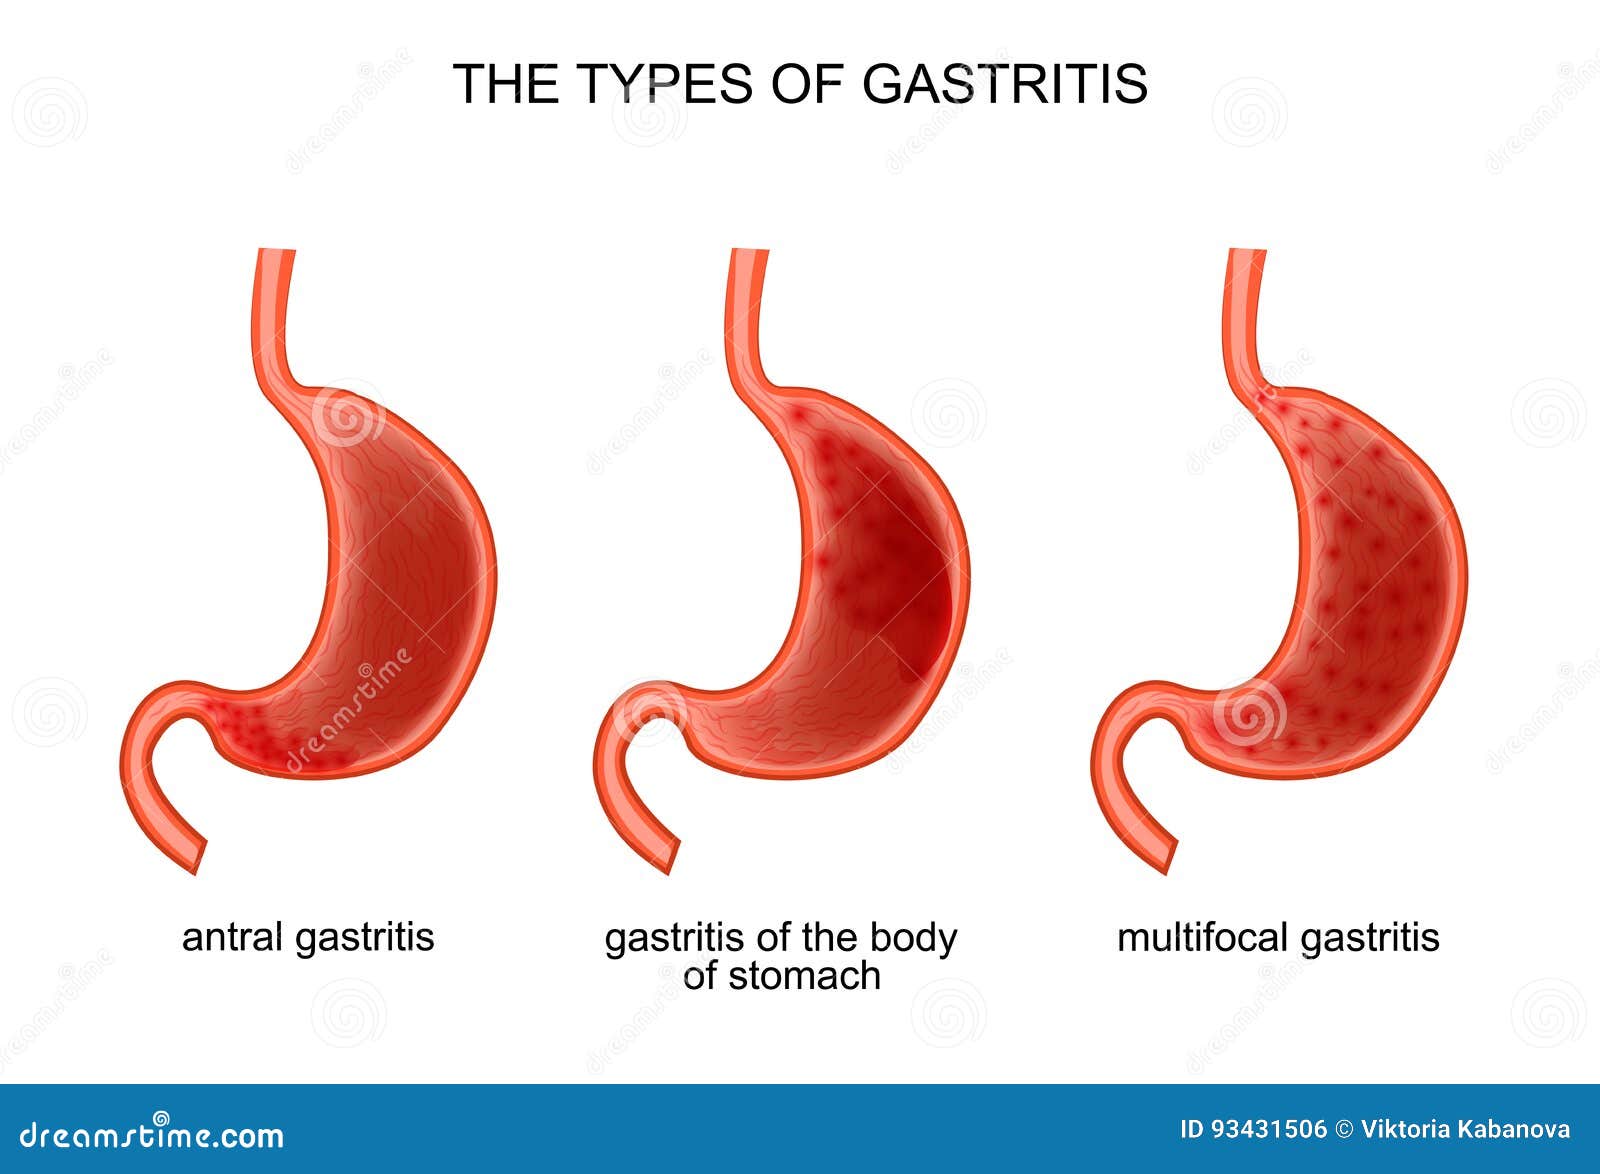 the types of gastritis